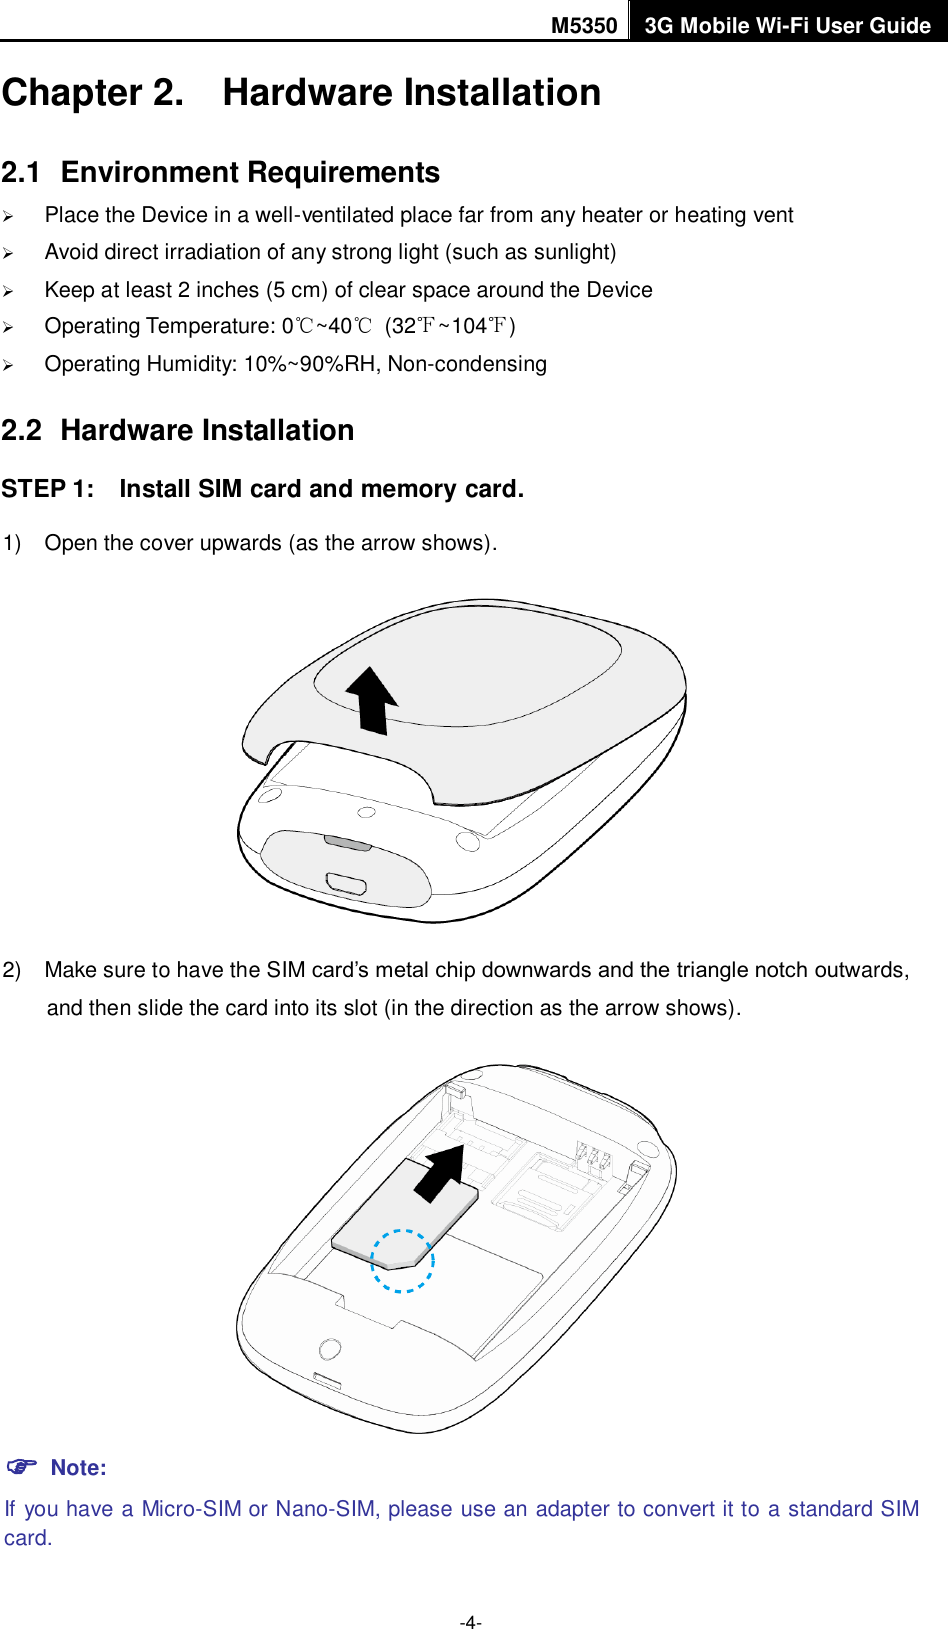 M5350 3G Mobile Wi-Fi User Guide  -4- Chapter 2.  Hardware Installation 2.1  Environment Requirements  Place the Device in a well-ventilated place far from any heater or heating vent    Avoid direct irradiation of any strong light (such as sunlight)  Keep at least 2 inches (5 cm) of clear space around the Device  Operating Temperature: 0℃~40℃  (32℉~104℉)  Operating Humidity: 10%~90%RH, Non-condensing 2.2  Hardware Installation STEP 1:    Install SIM card and memory card. 1)  Open the cover upwards (as the arrow shows).  2)  Make sure to have the SIM card‟s metal chip downwards and the triangle notch outwards, and then slide the card into its slot (in the direction as the arrow shows).   Note: If you have a Micro-SIM or Nano-SIM, please use an adapter to convert it to a standard SIM card. 